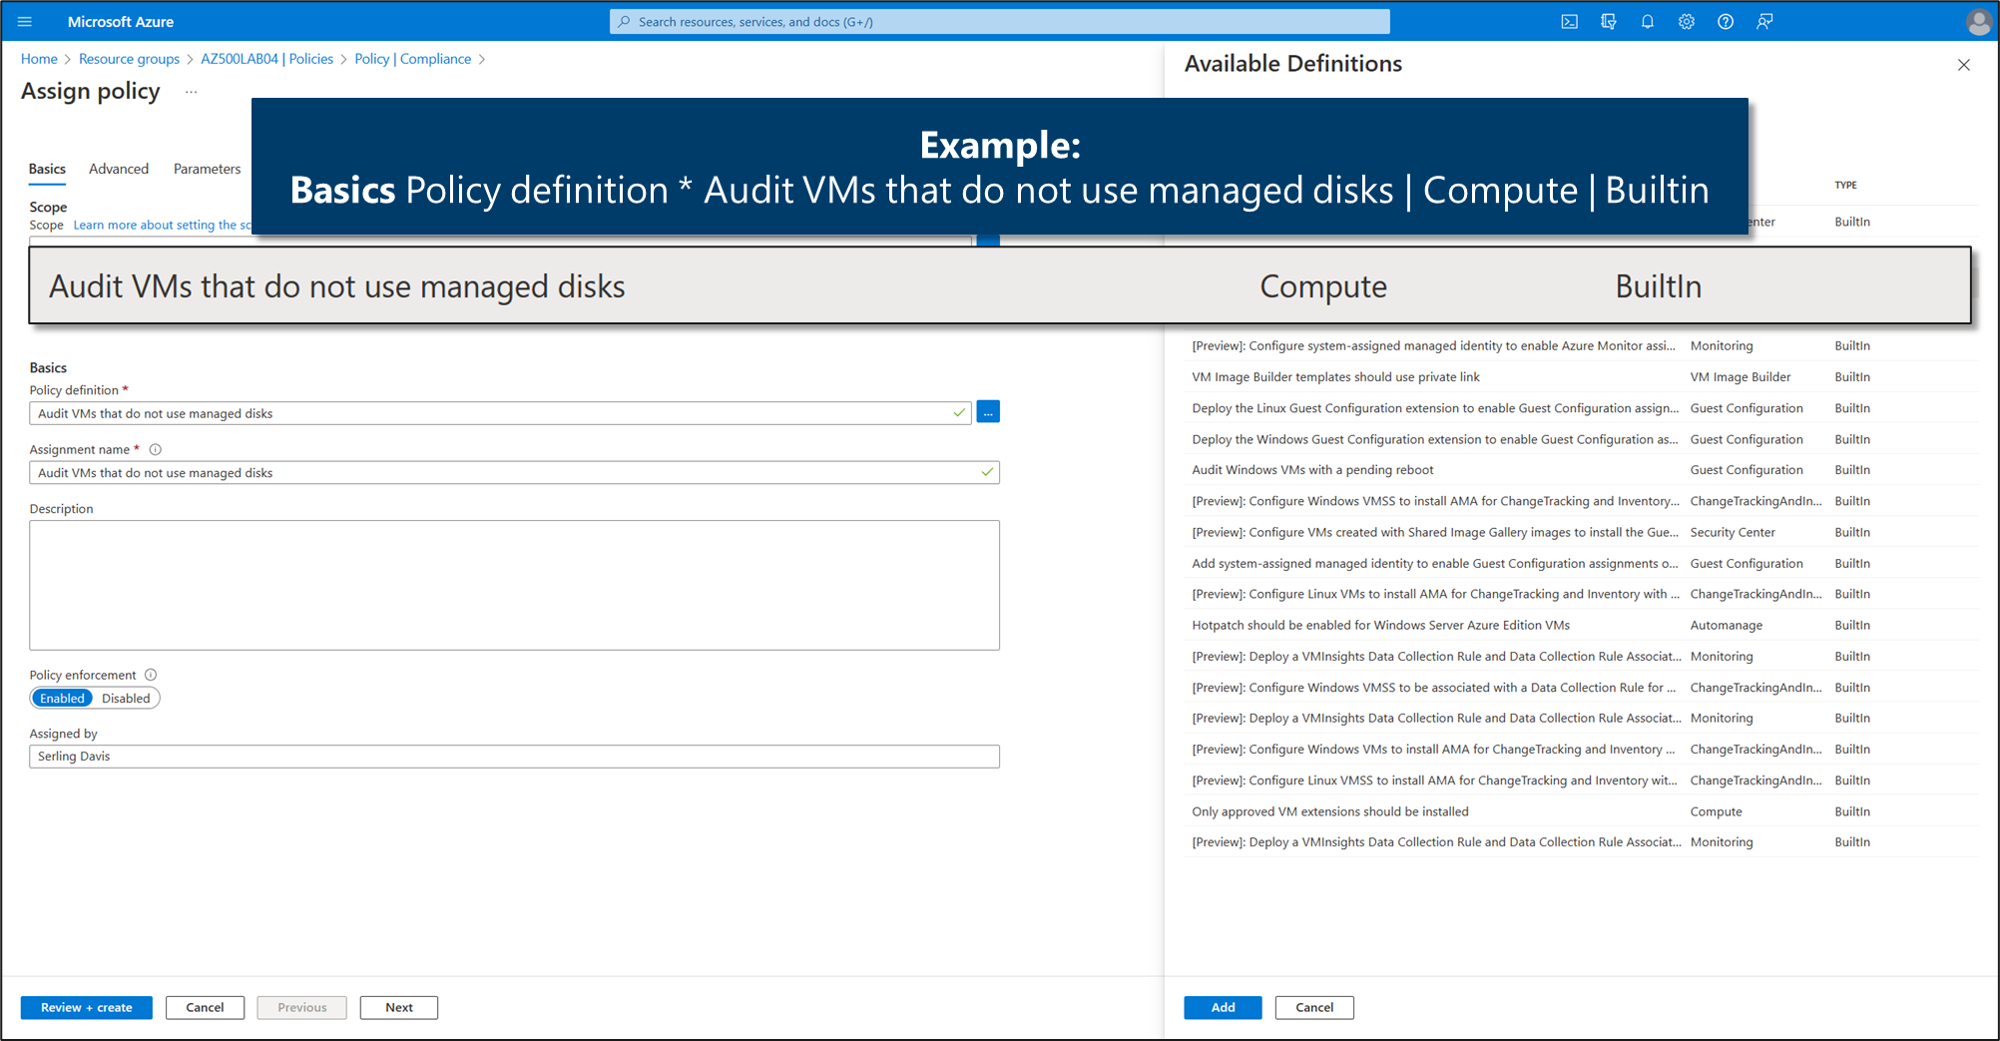 Screenshot showing an example of a basic policy definition to audit VMs without managed disks.